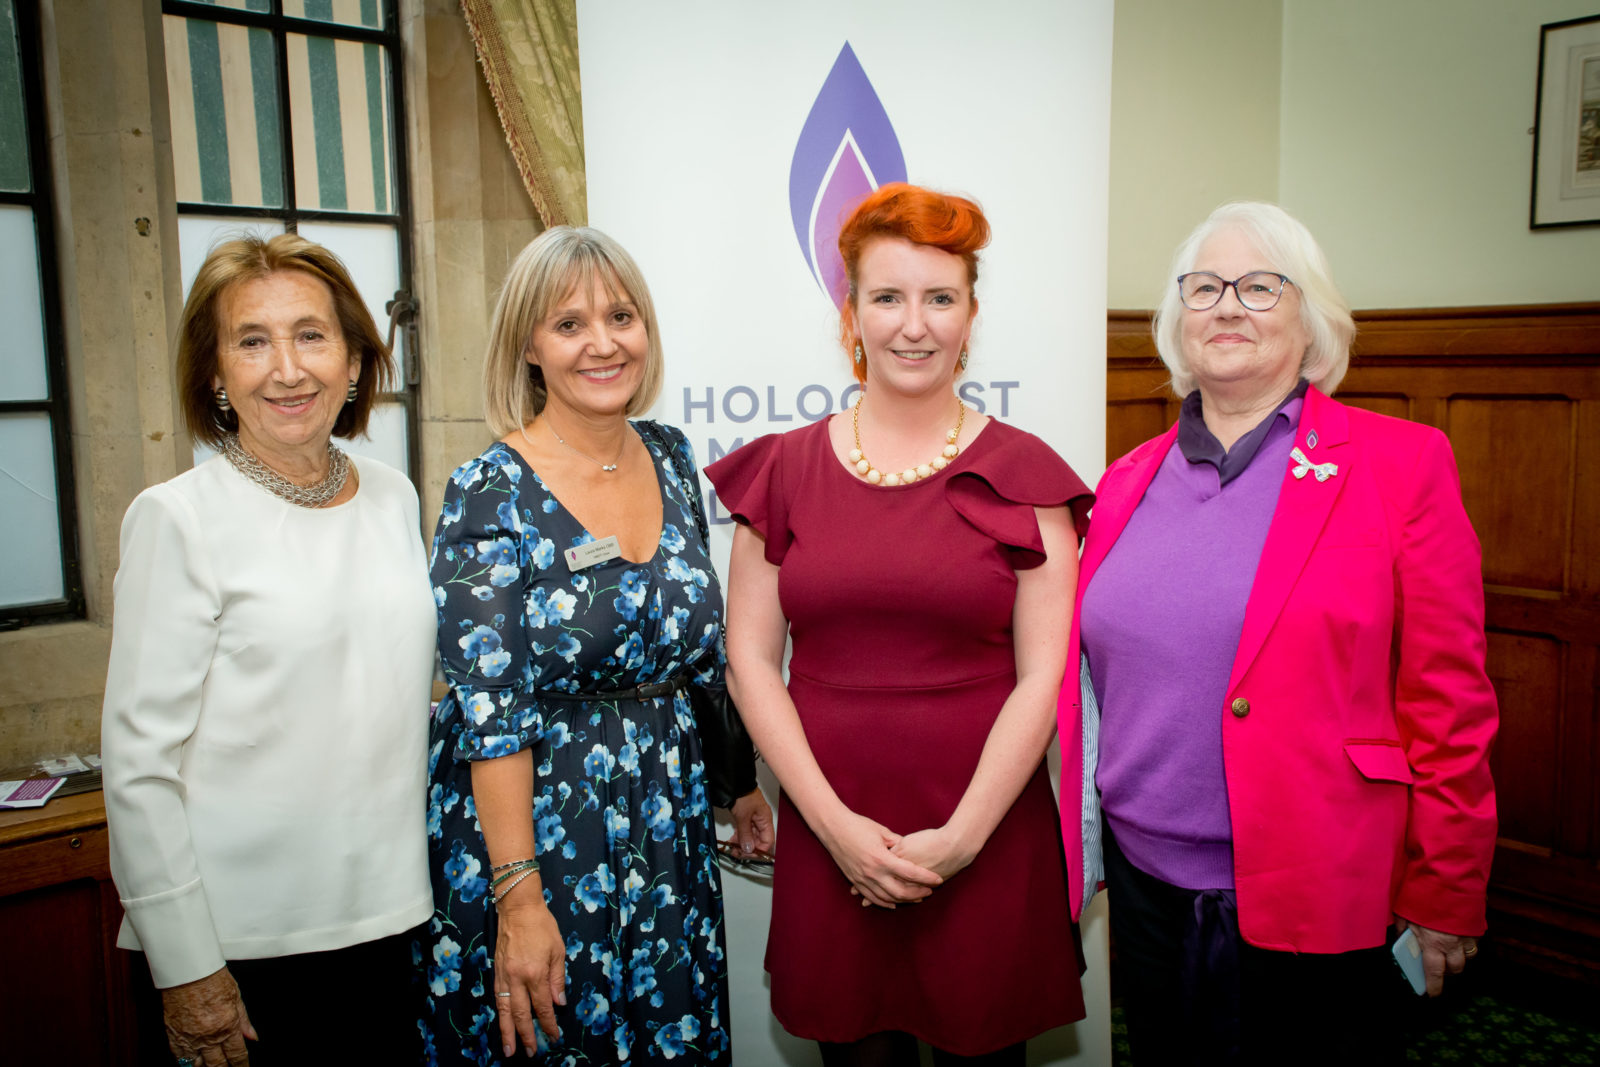 Louise with Hannah Lewis, Laura Marks, and Joan Salter of the Holocaust Memorial Day Trust